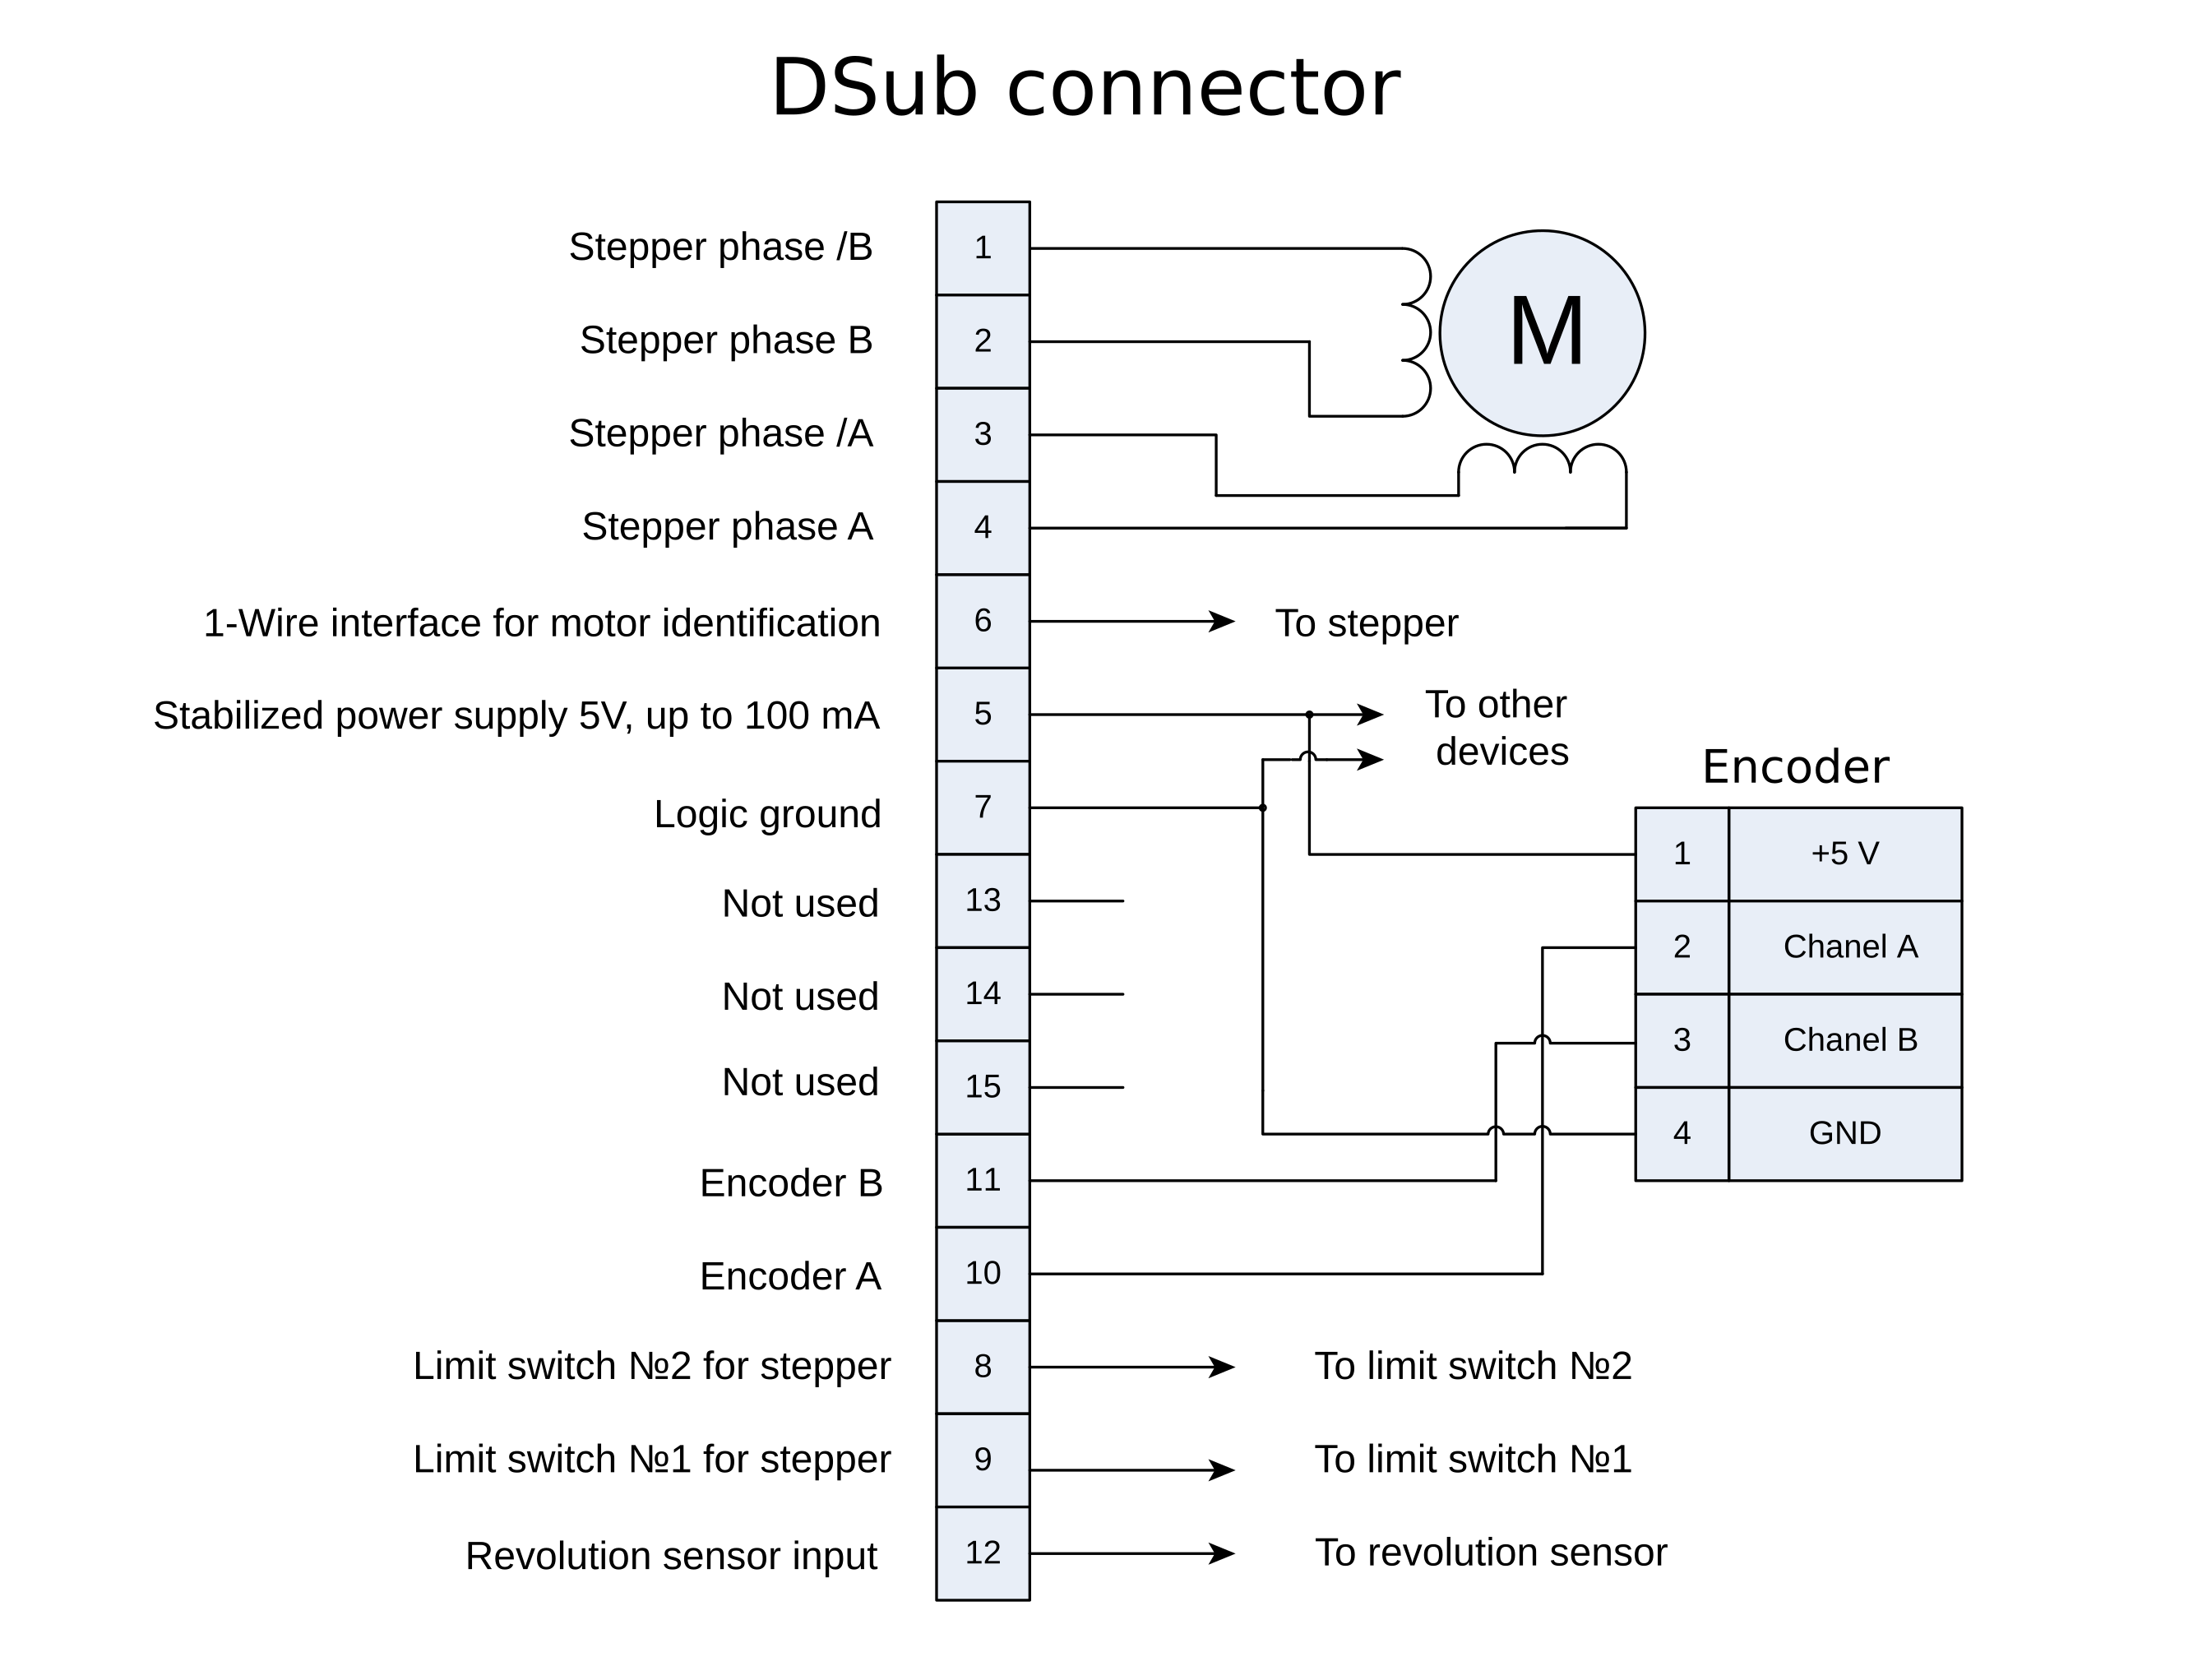 ../../_images/Scheme_of_all_electric_connections_eng.png